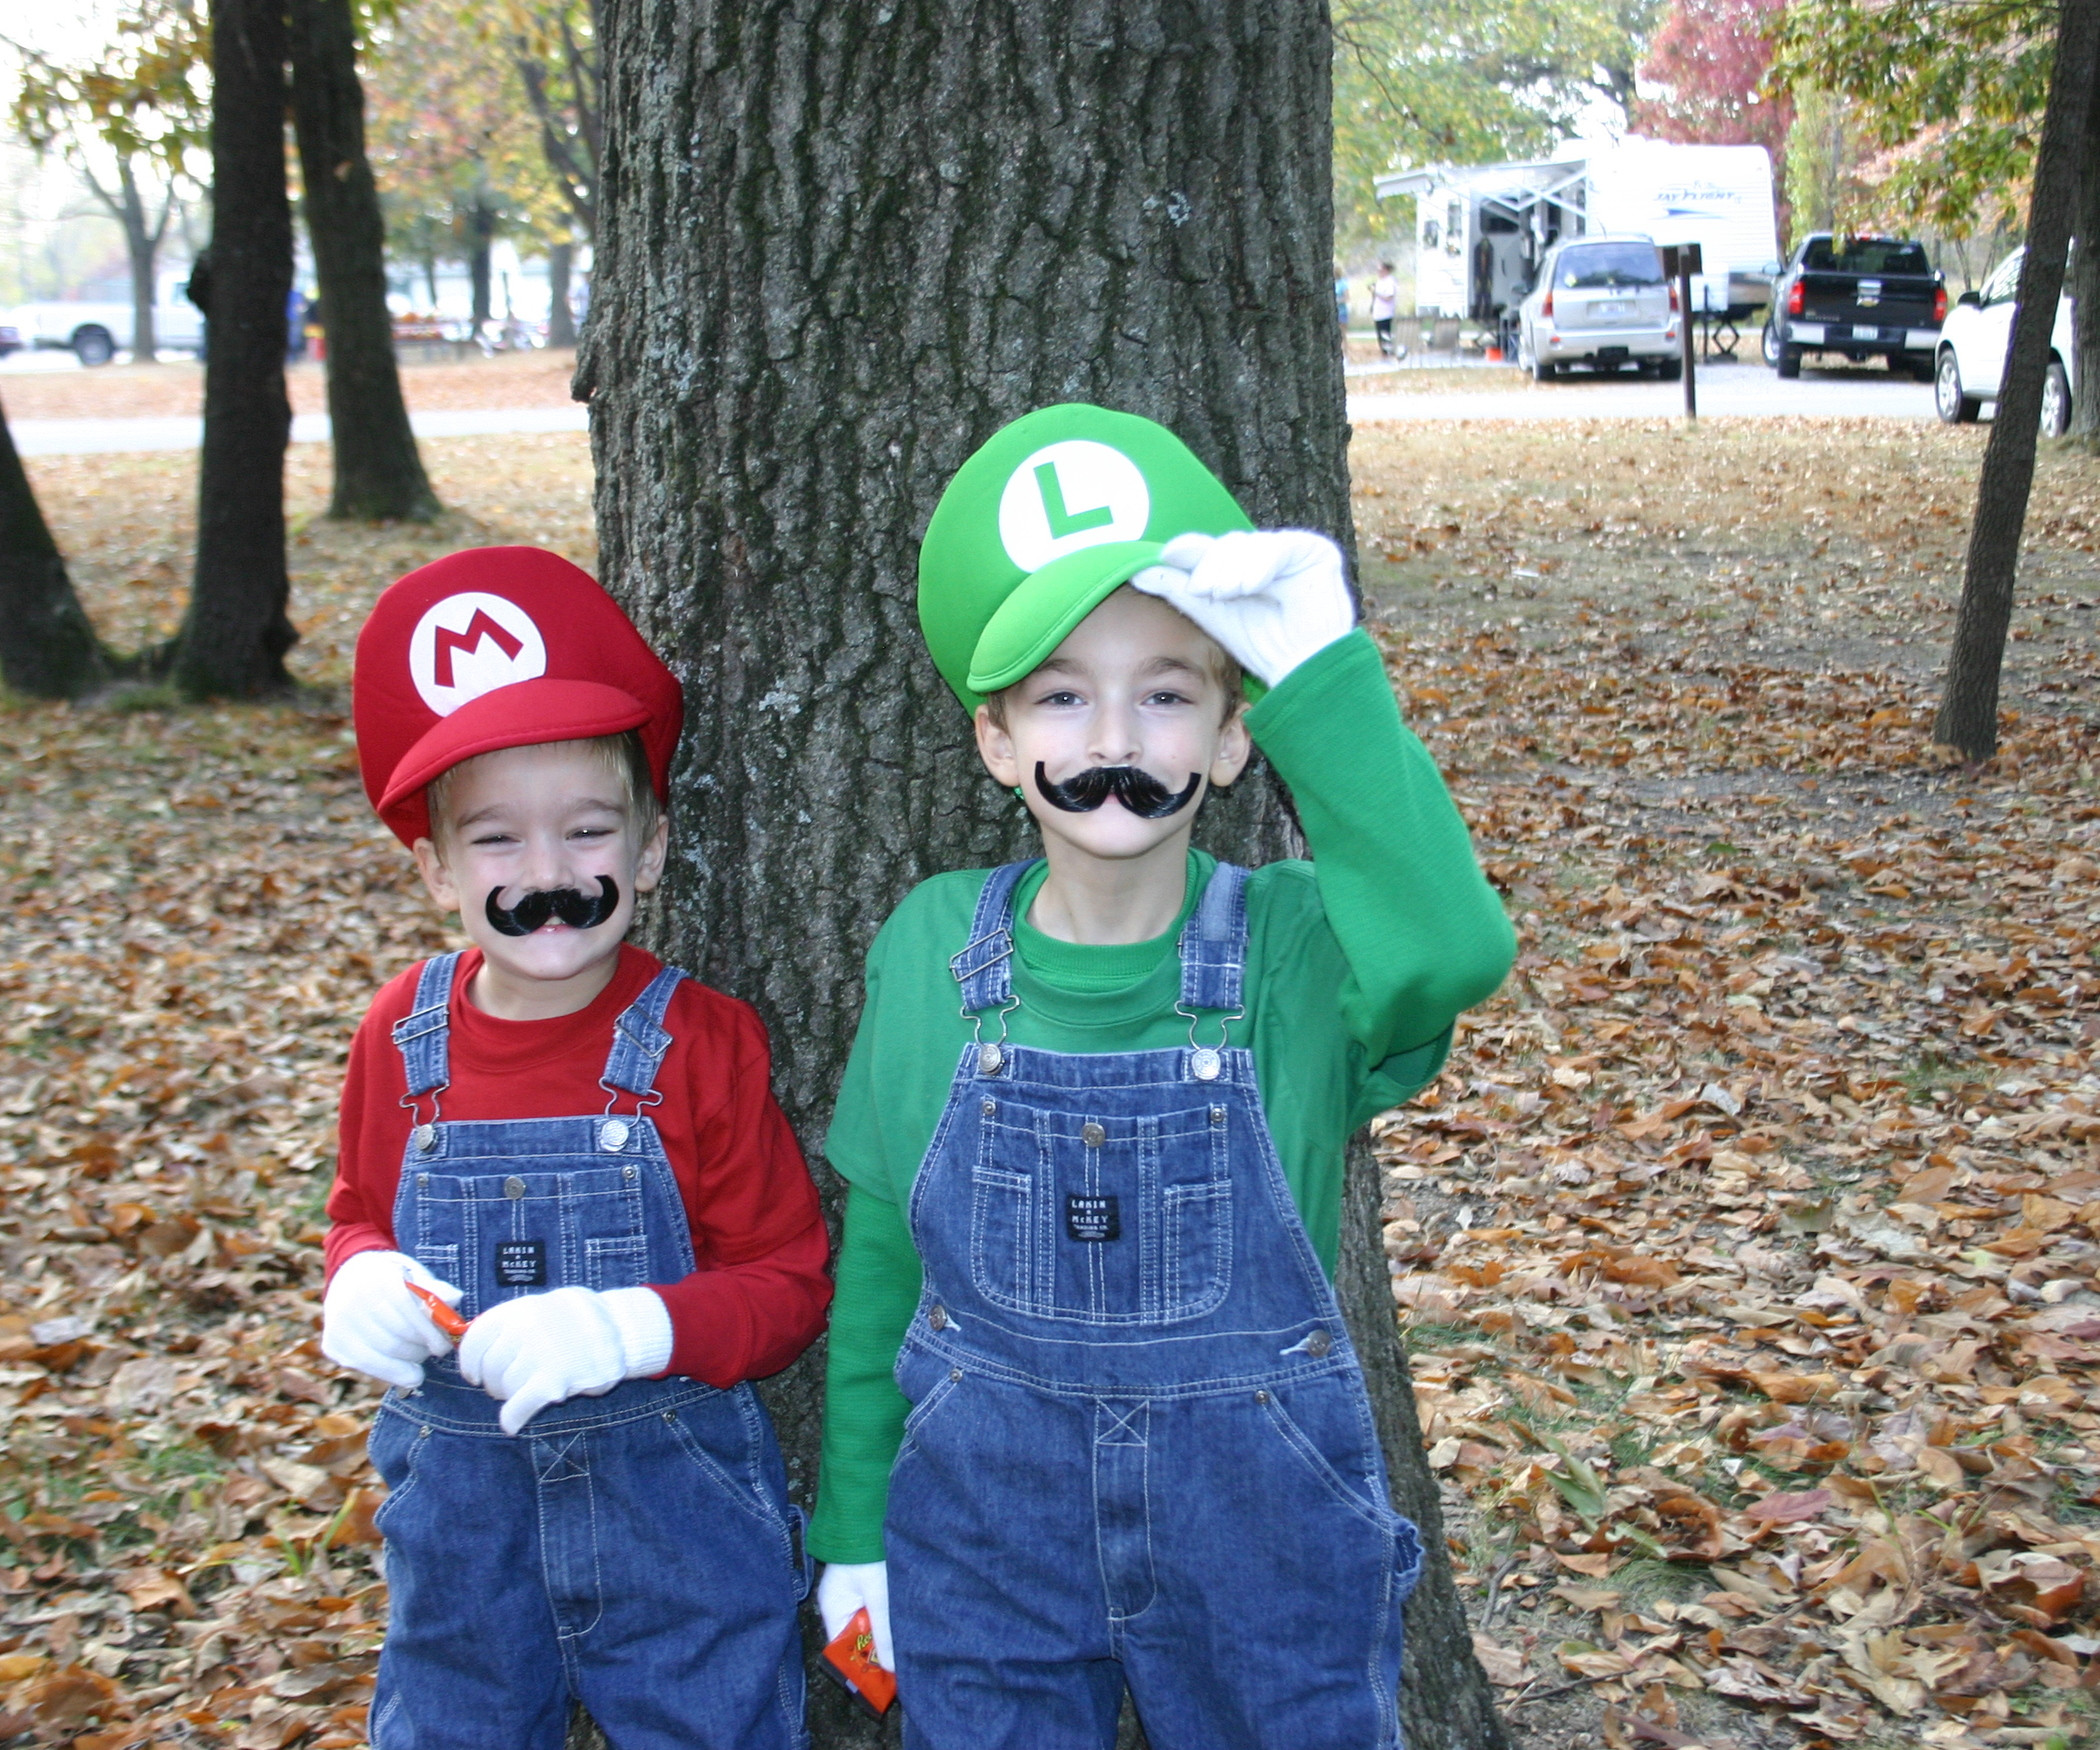 DIY Mario Costumes
 Mario Bros Costumes With Sound Effects 8 Steps with